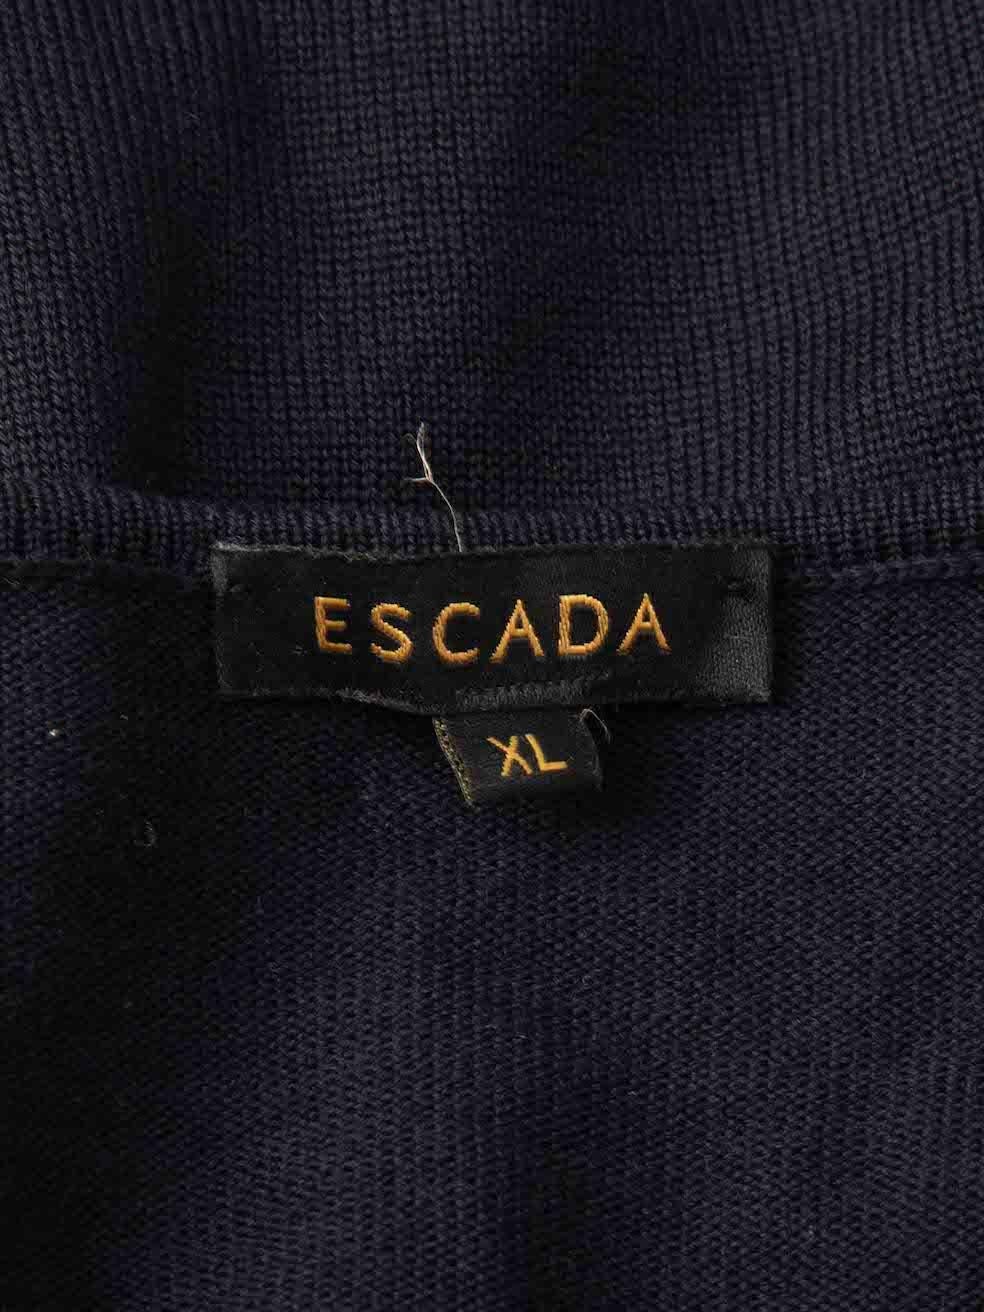 Escada Navy Wool Stripe Panelled Jumper Size XL In Excellent Condition For Sale In London, GB